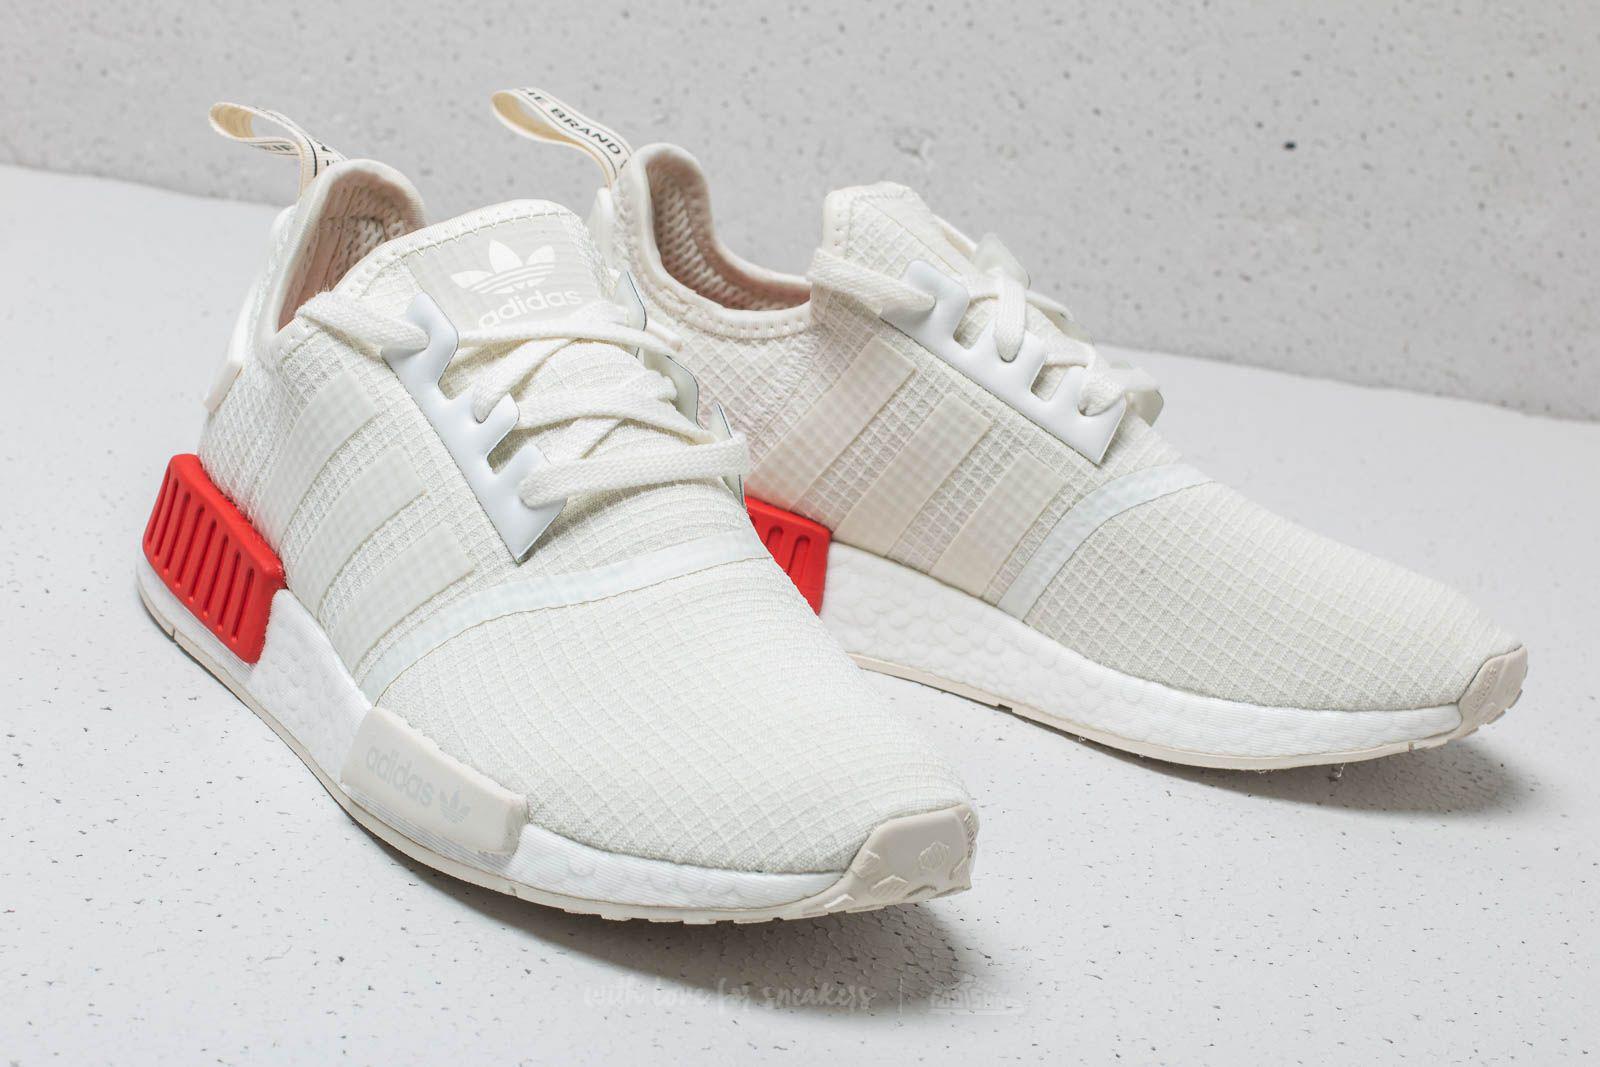 adidas nmd r1 off white lush red, Off 63%, www.spotsclick.com